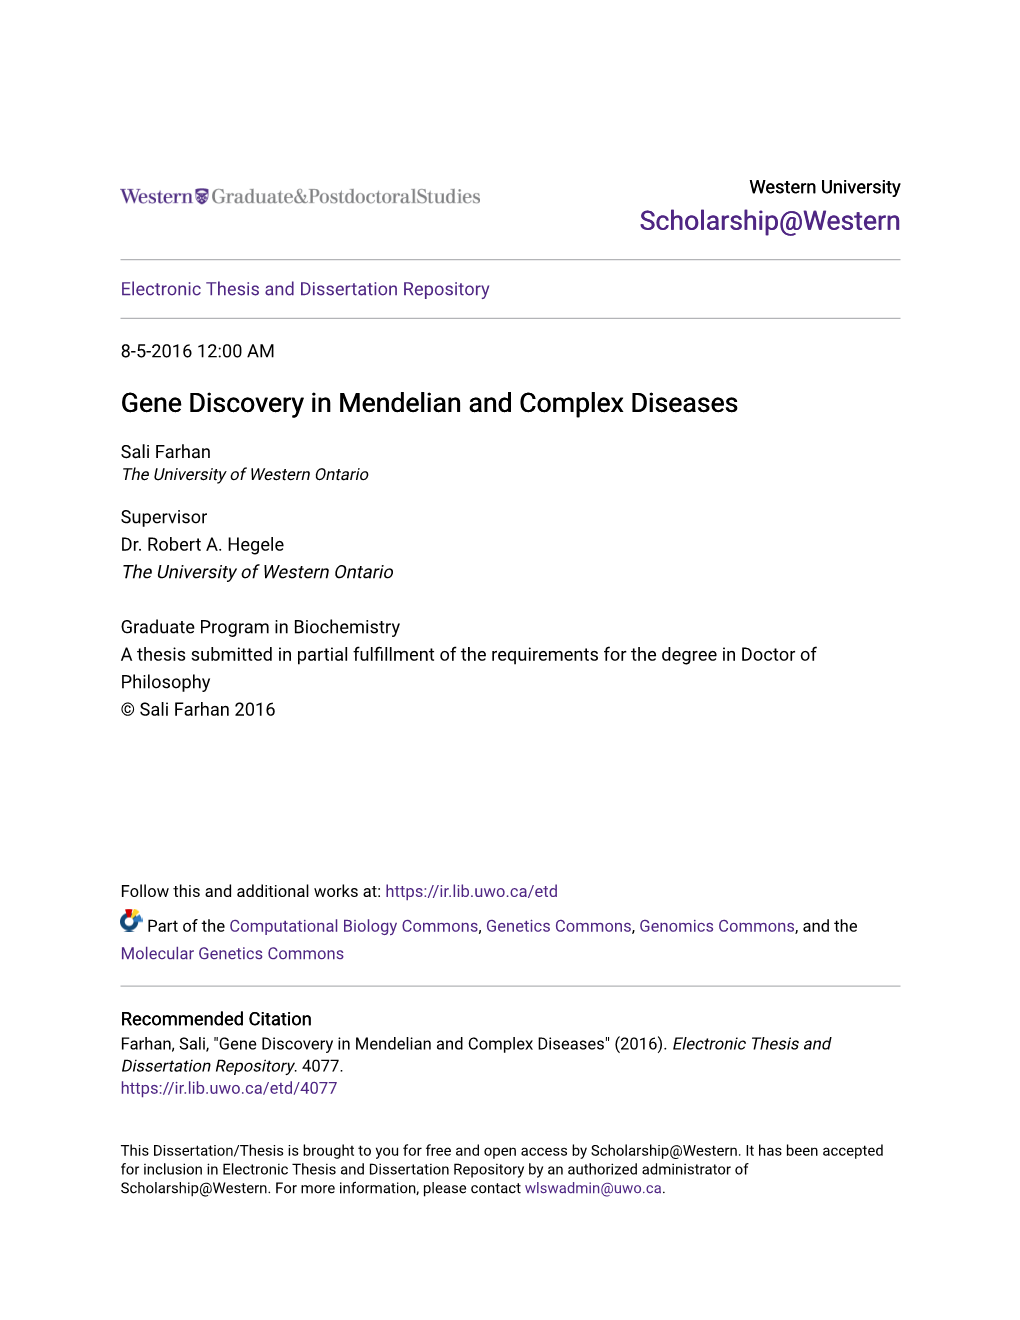 Gene Discovery in Mendelian and Complex Diseases